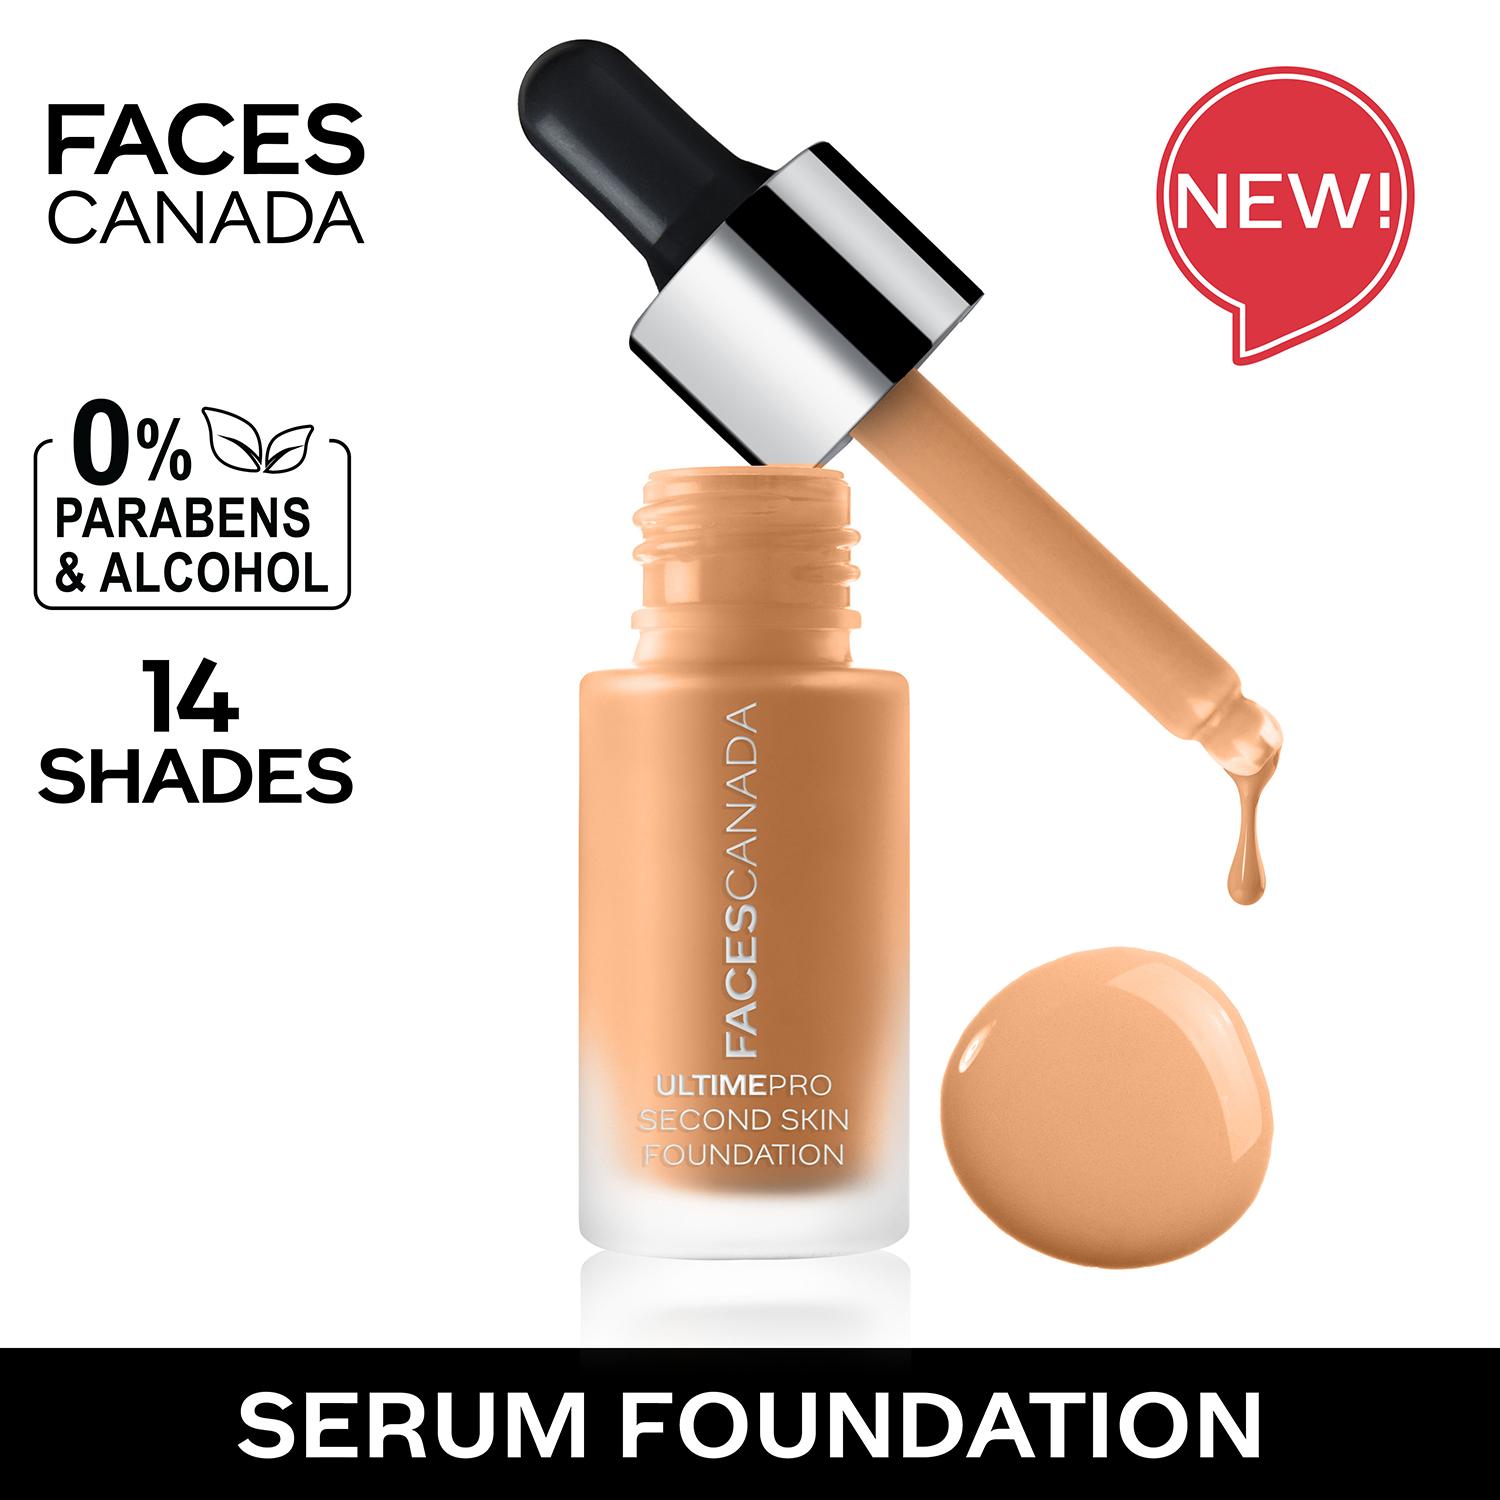 Faces Canada | Faces Canada Ultime Pro Second Skin Foundation - 01 Ivory (15ml)